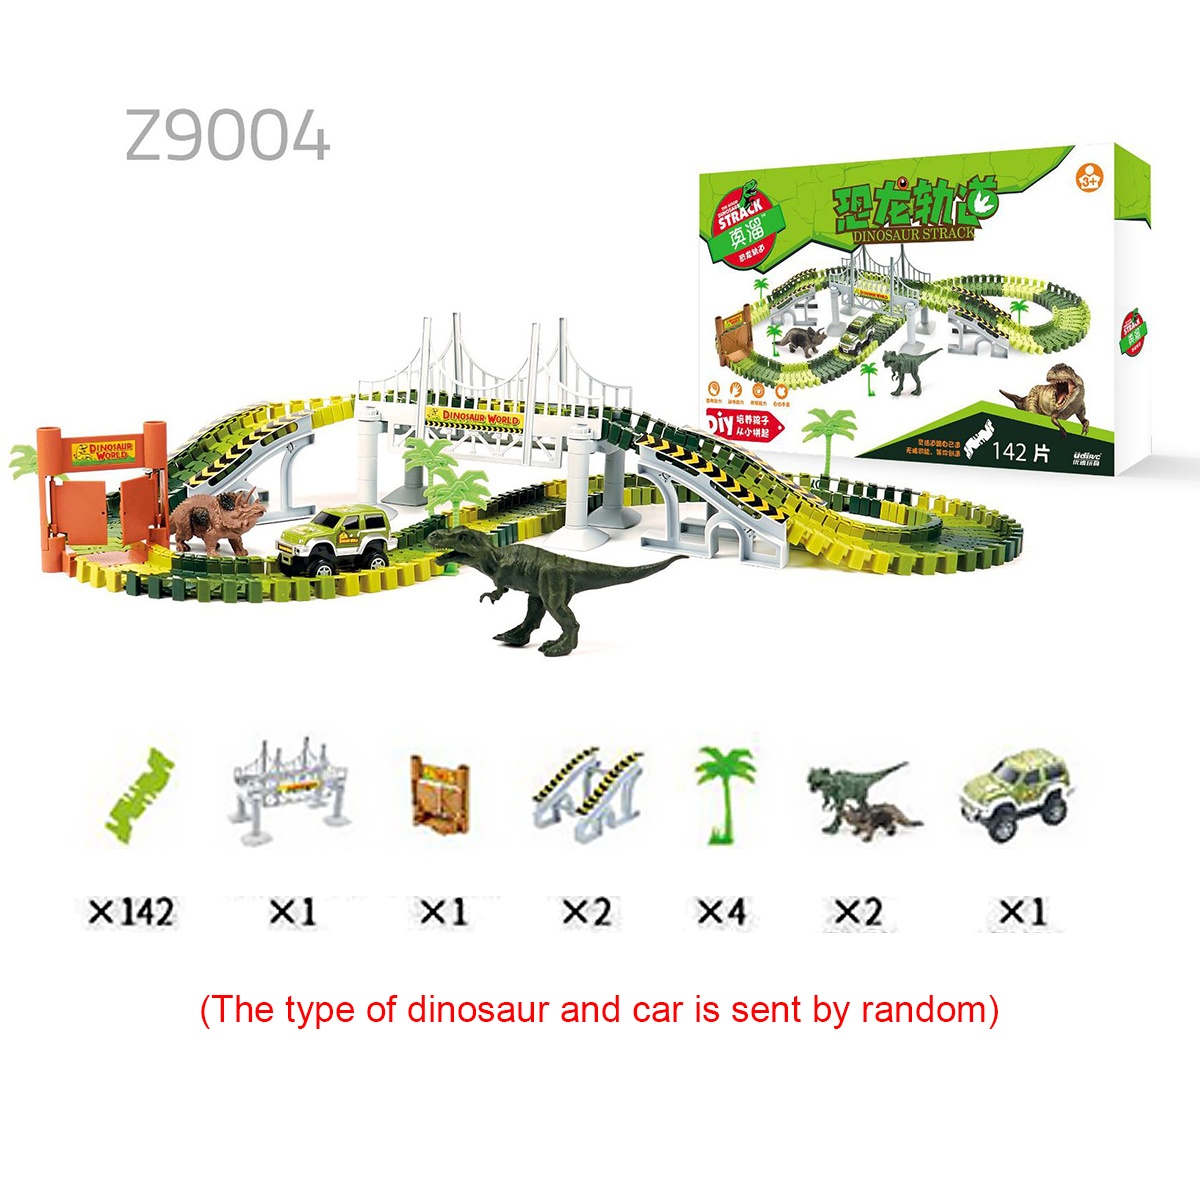 Dinosaur-World-Flexible-Racing-Car-Track-Toys-Construction-Play-Game-Educational-Set-Toy-for-Kids-Gi-1693947-10